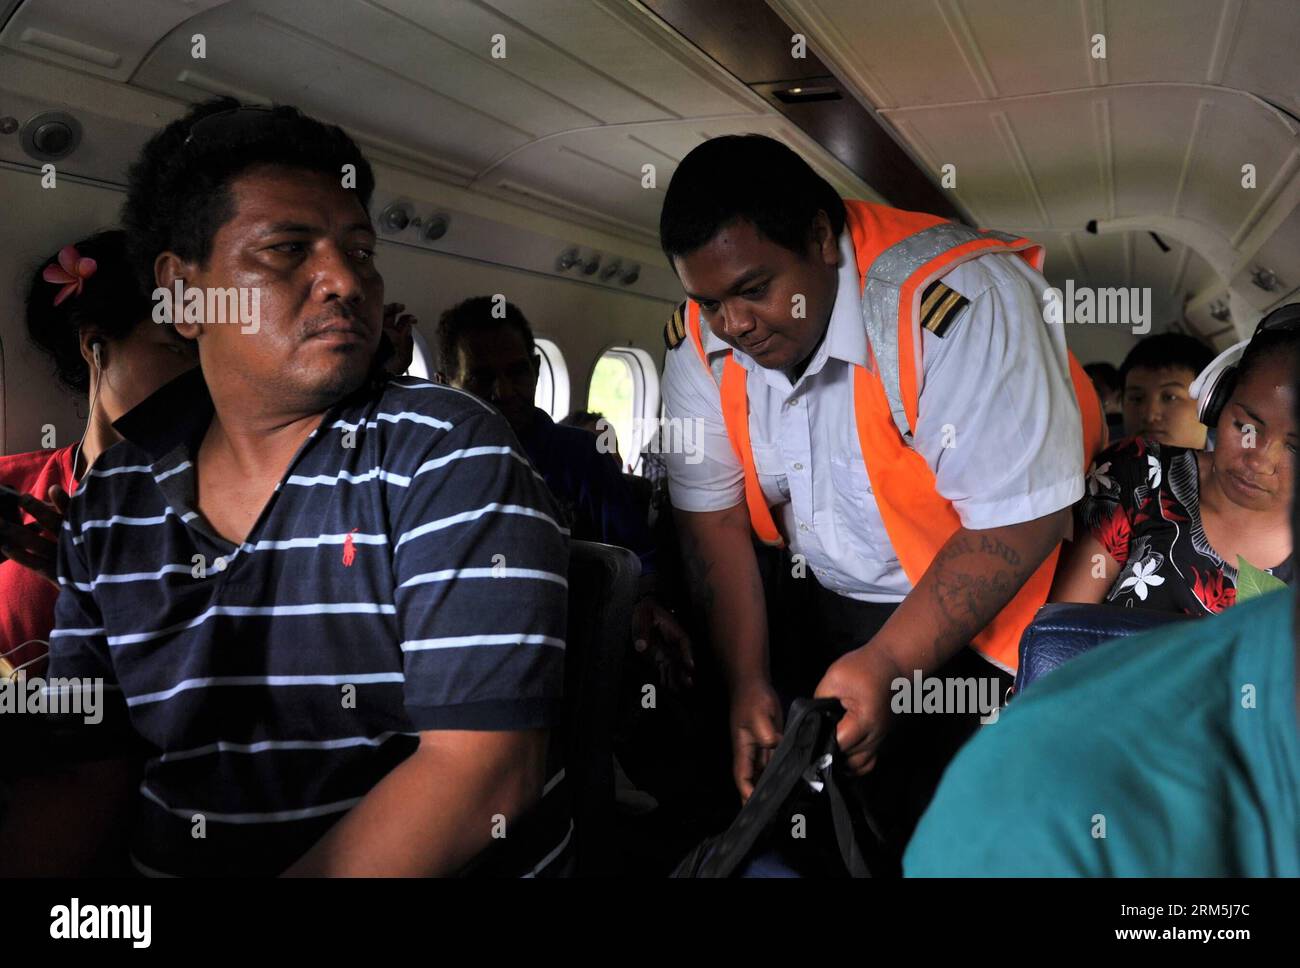 Bildnummer: 60669186  Datum: 29.10.2013  Copyright: imago/Xinhua A crew member is on board of a Twin Otter lightplane which has served 30 years in Solomon Islands, Oct. 29, 2013. The Solomon Airlines owns a history of more than 50 years. The DHC 8-102 , Twin Otter and Islander are three kinds of vintage lightplanes serving for national flights which can respectively carry 36, 16 and 9 passengers. Most of these planes have served more than ten years or even dozens of years. (Xinhua/Gao Jianjun) SOLOMON ISLANDS-SOLOMON AIRLINES-VINTAGE LIGHTPLANES PUBLICATIONxNOTxINxCHN xcb x0x 2013 quer     606 Stock Photo